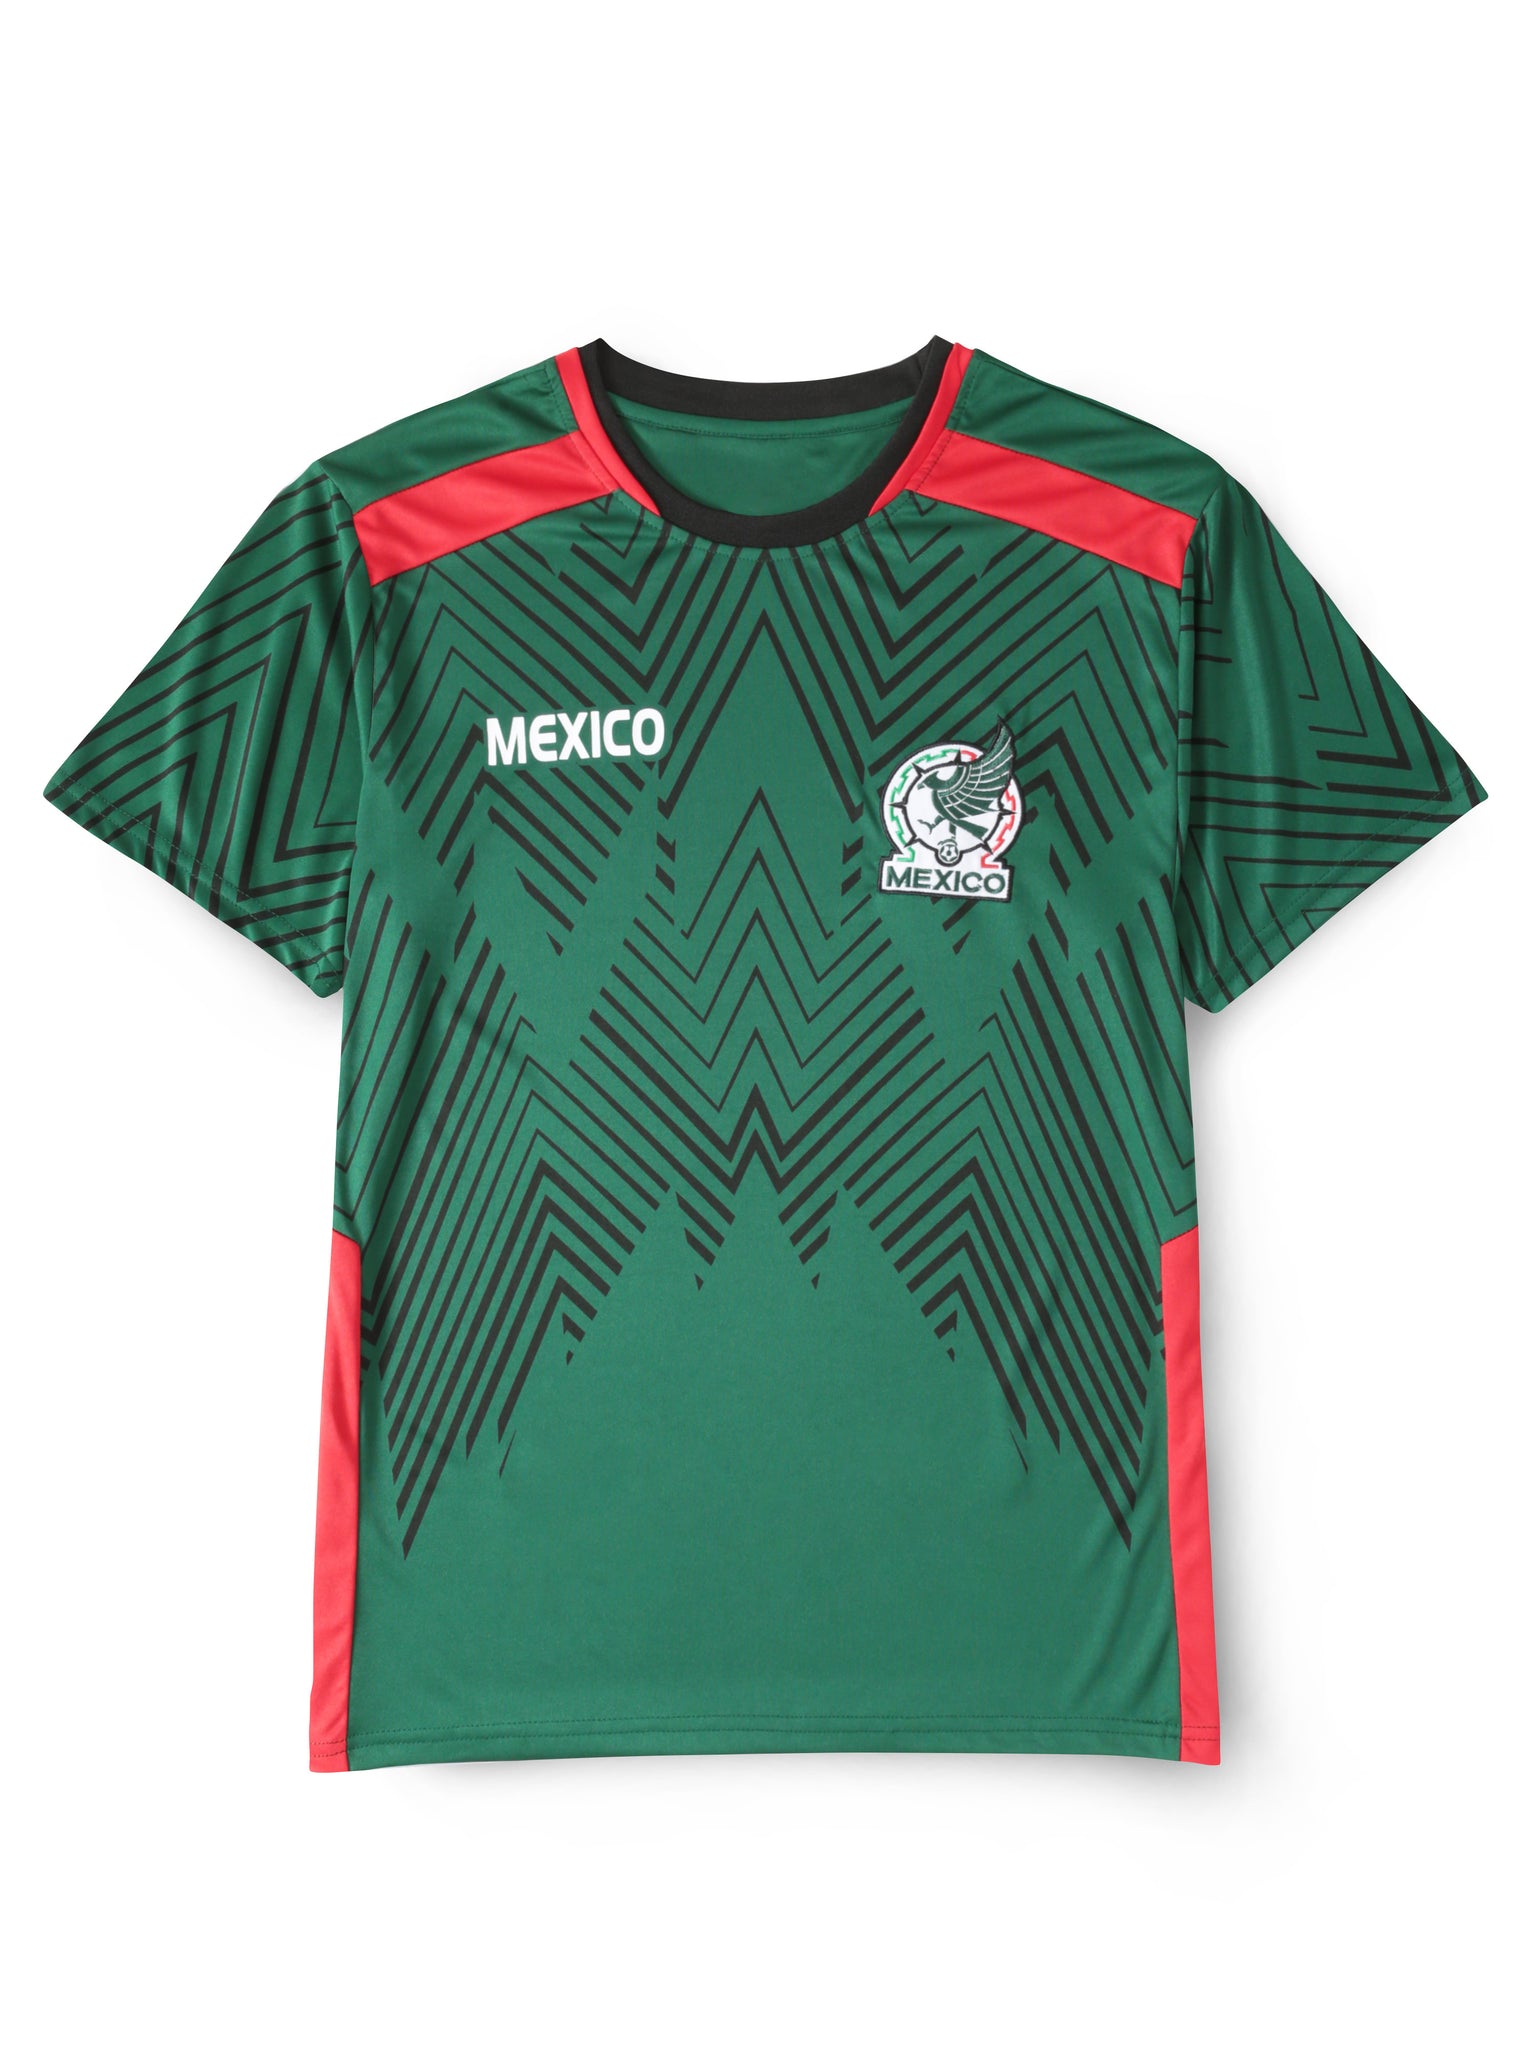 Mens Mexico World Soccer Football Jersey - T-Shirt & Tank Tops | Hat and Beyond 3X-Large / White